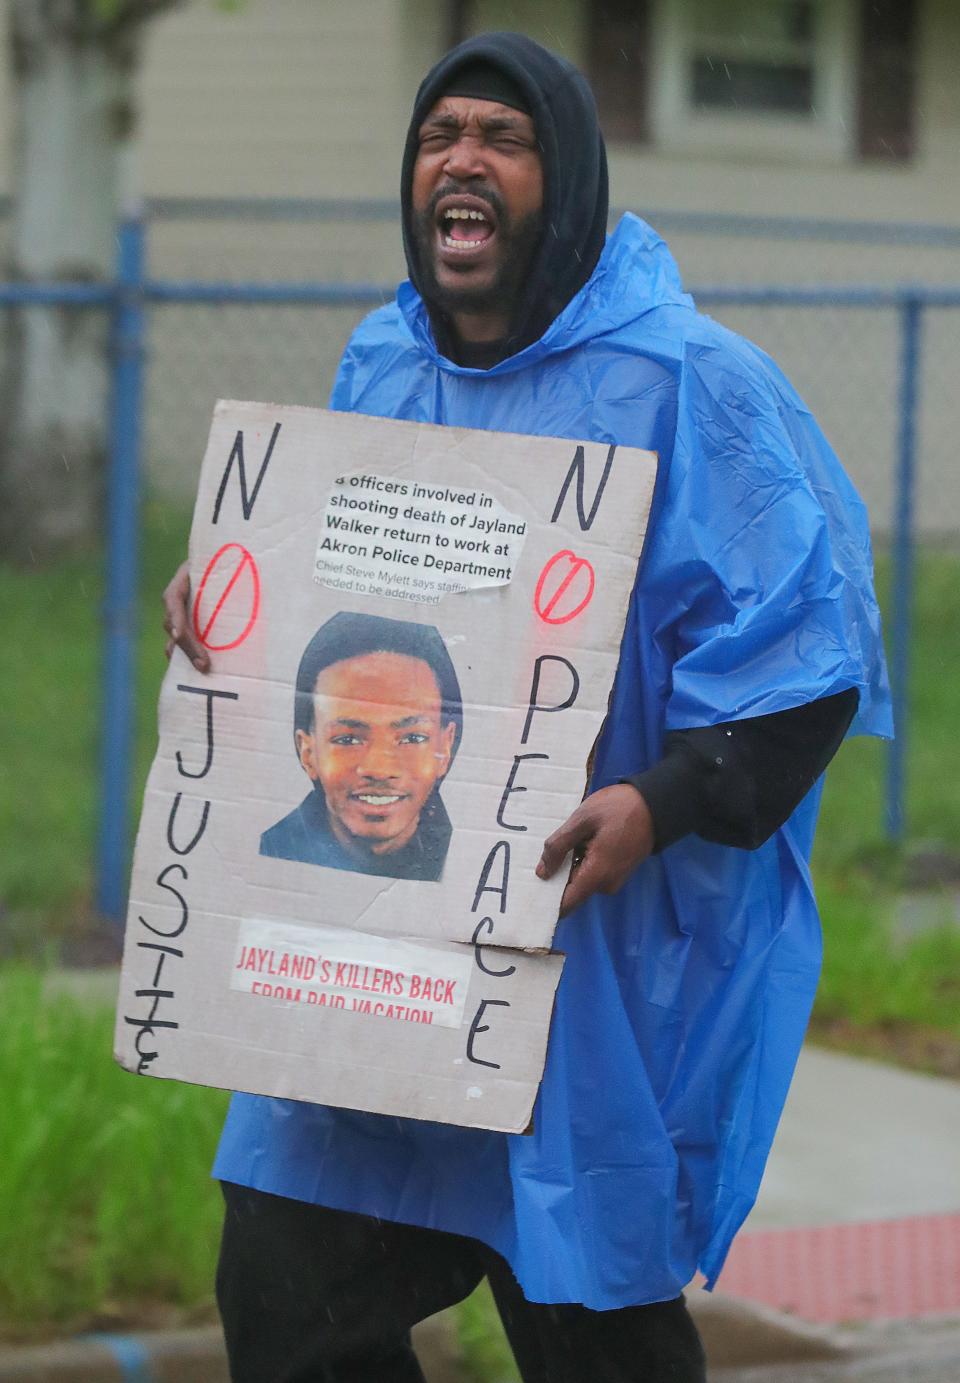 A protester marches along Fess Avenue in Akron for Jayland Walker on Friday.